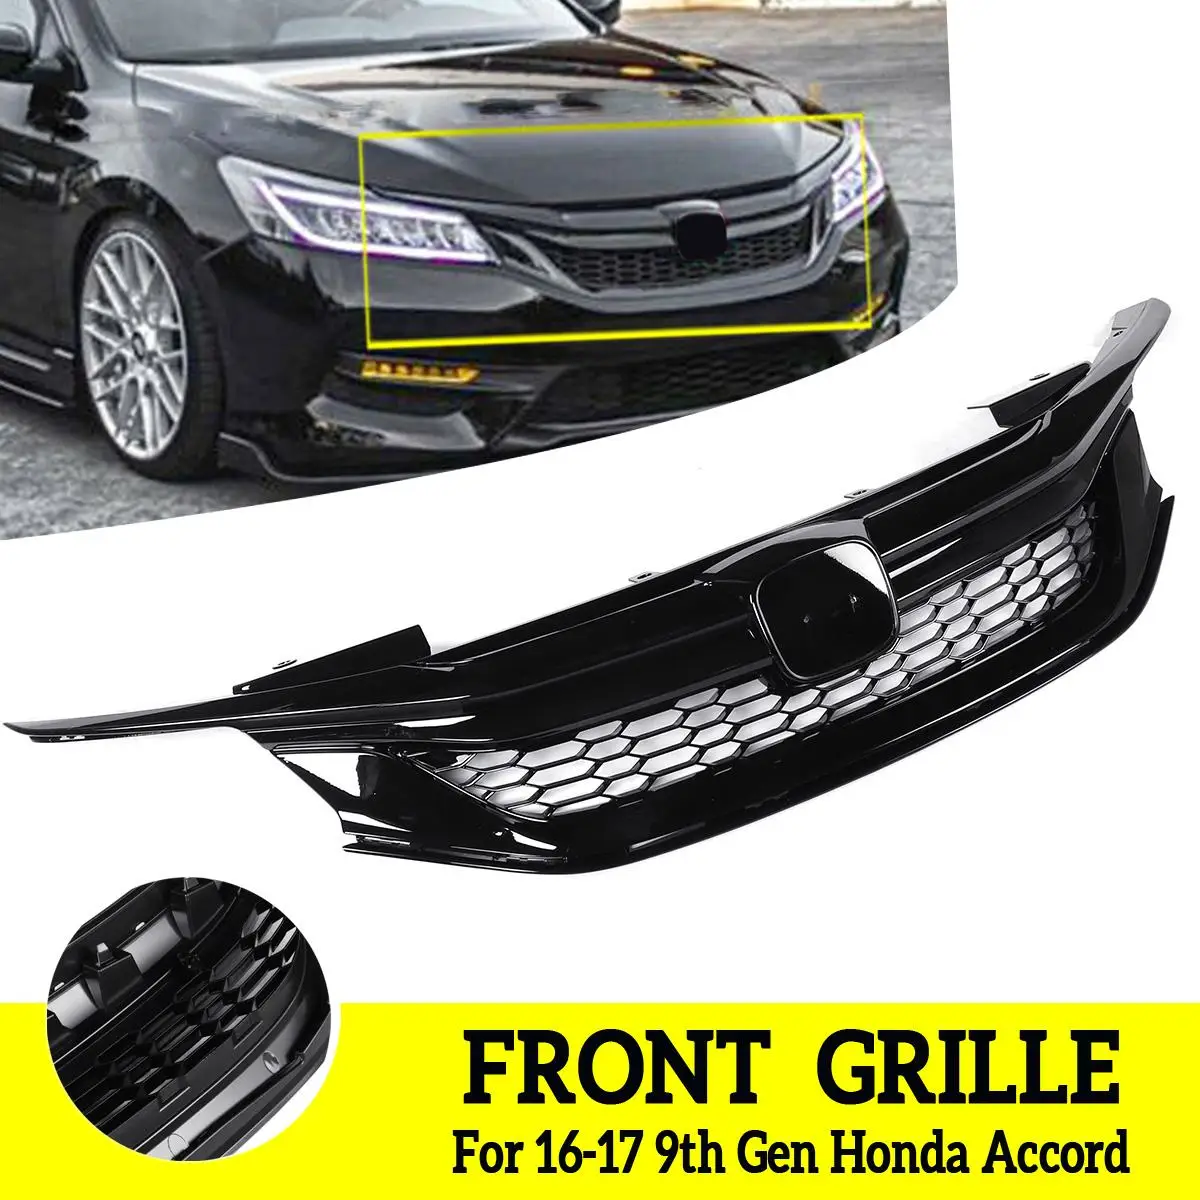 

Front Grille Front Bumper Hood High Quality ABS Car Styling Grille Replacement For Honda Accord 16-17 9th Gen Auto Accessories